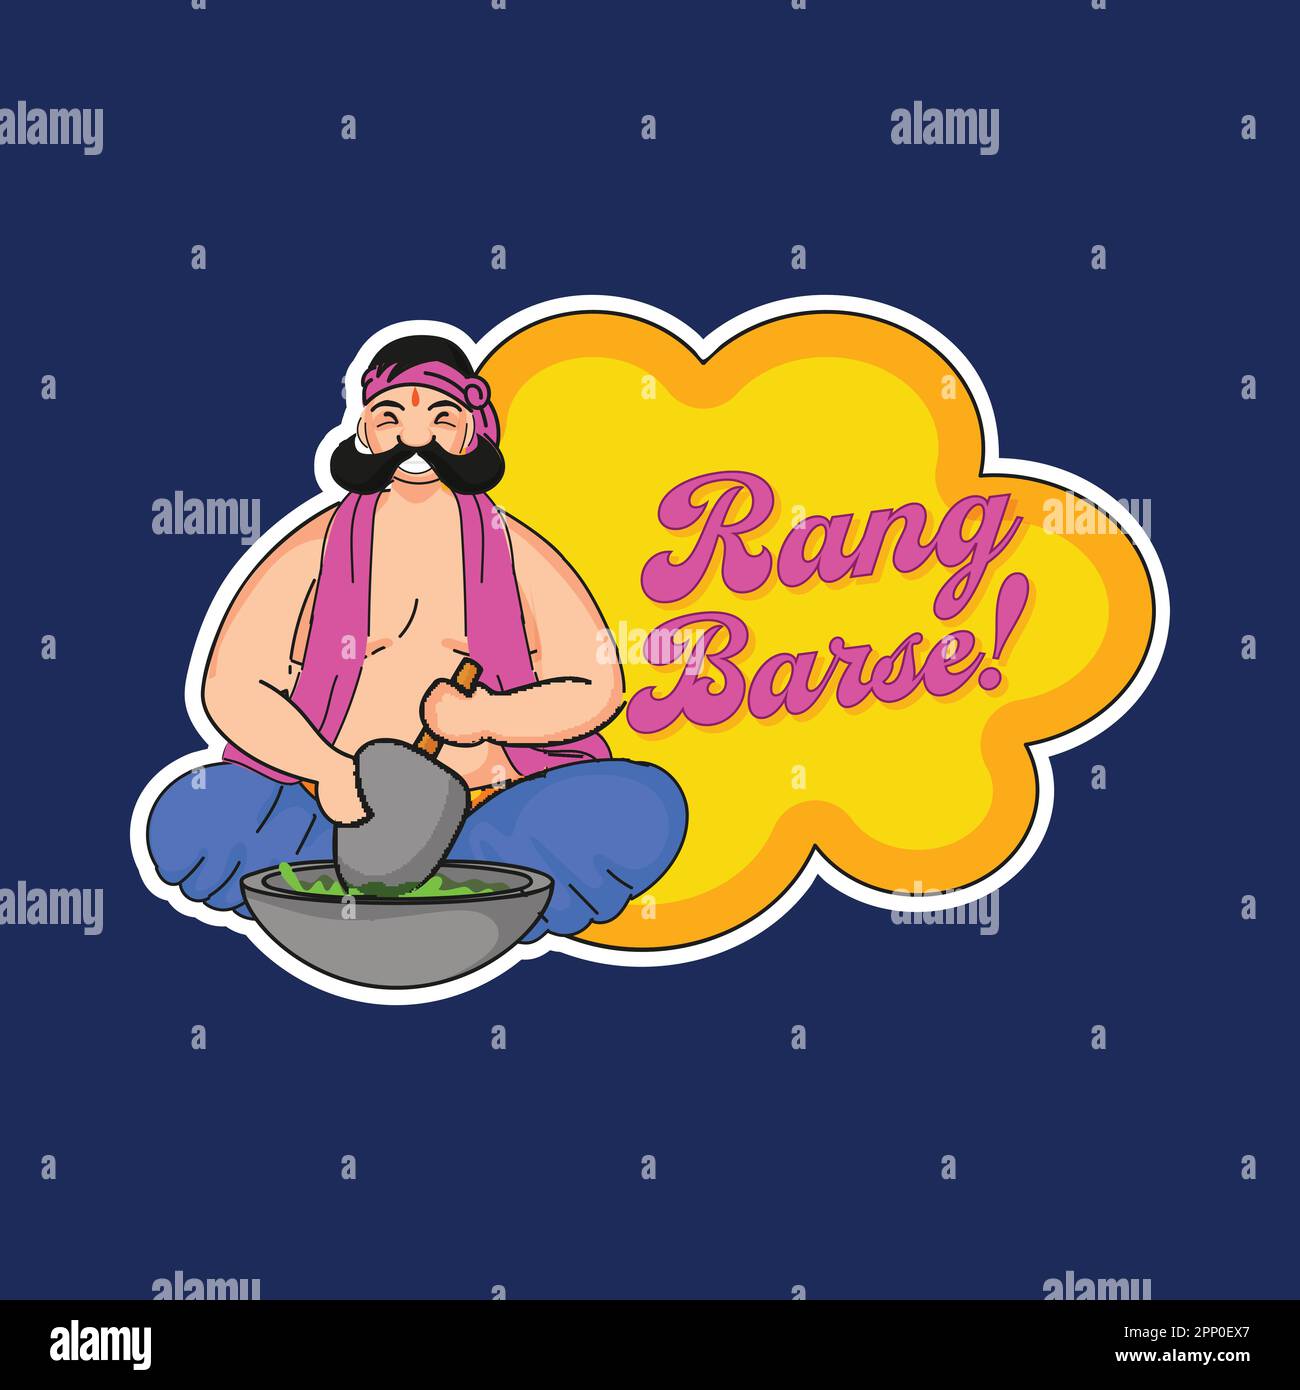 Sticker Style RANG BARSE! Font With Mustache Man Grinding Weed Or Hemp On Chrome Yellow And Blue Background. Stock Vector